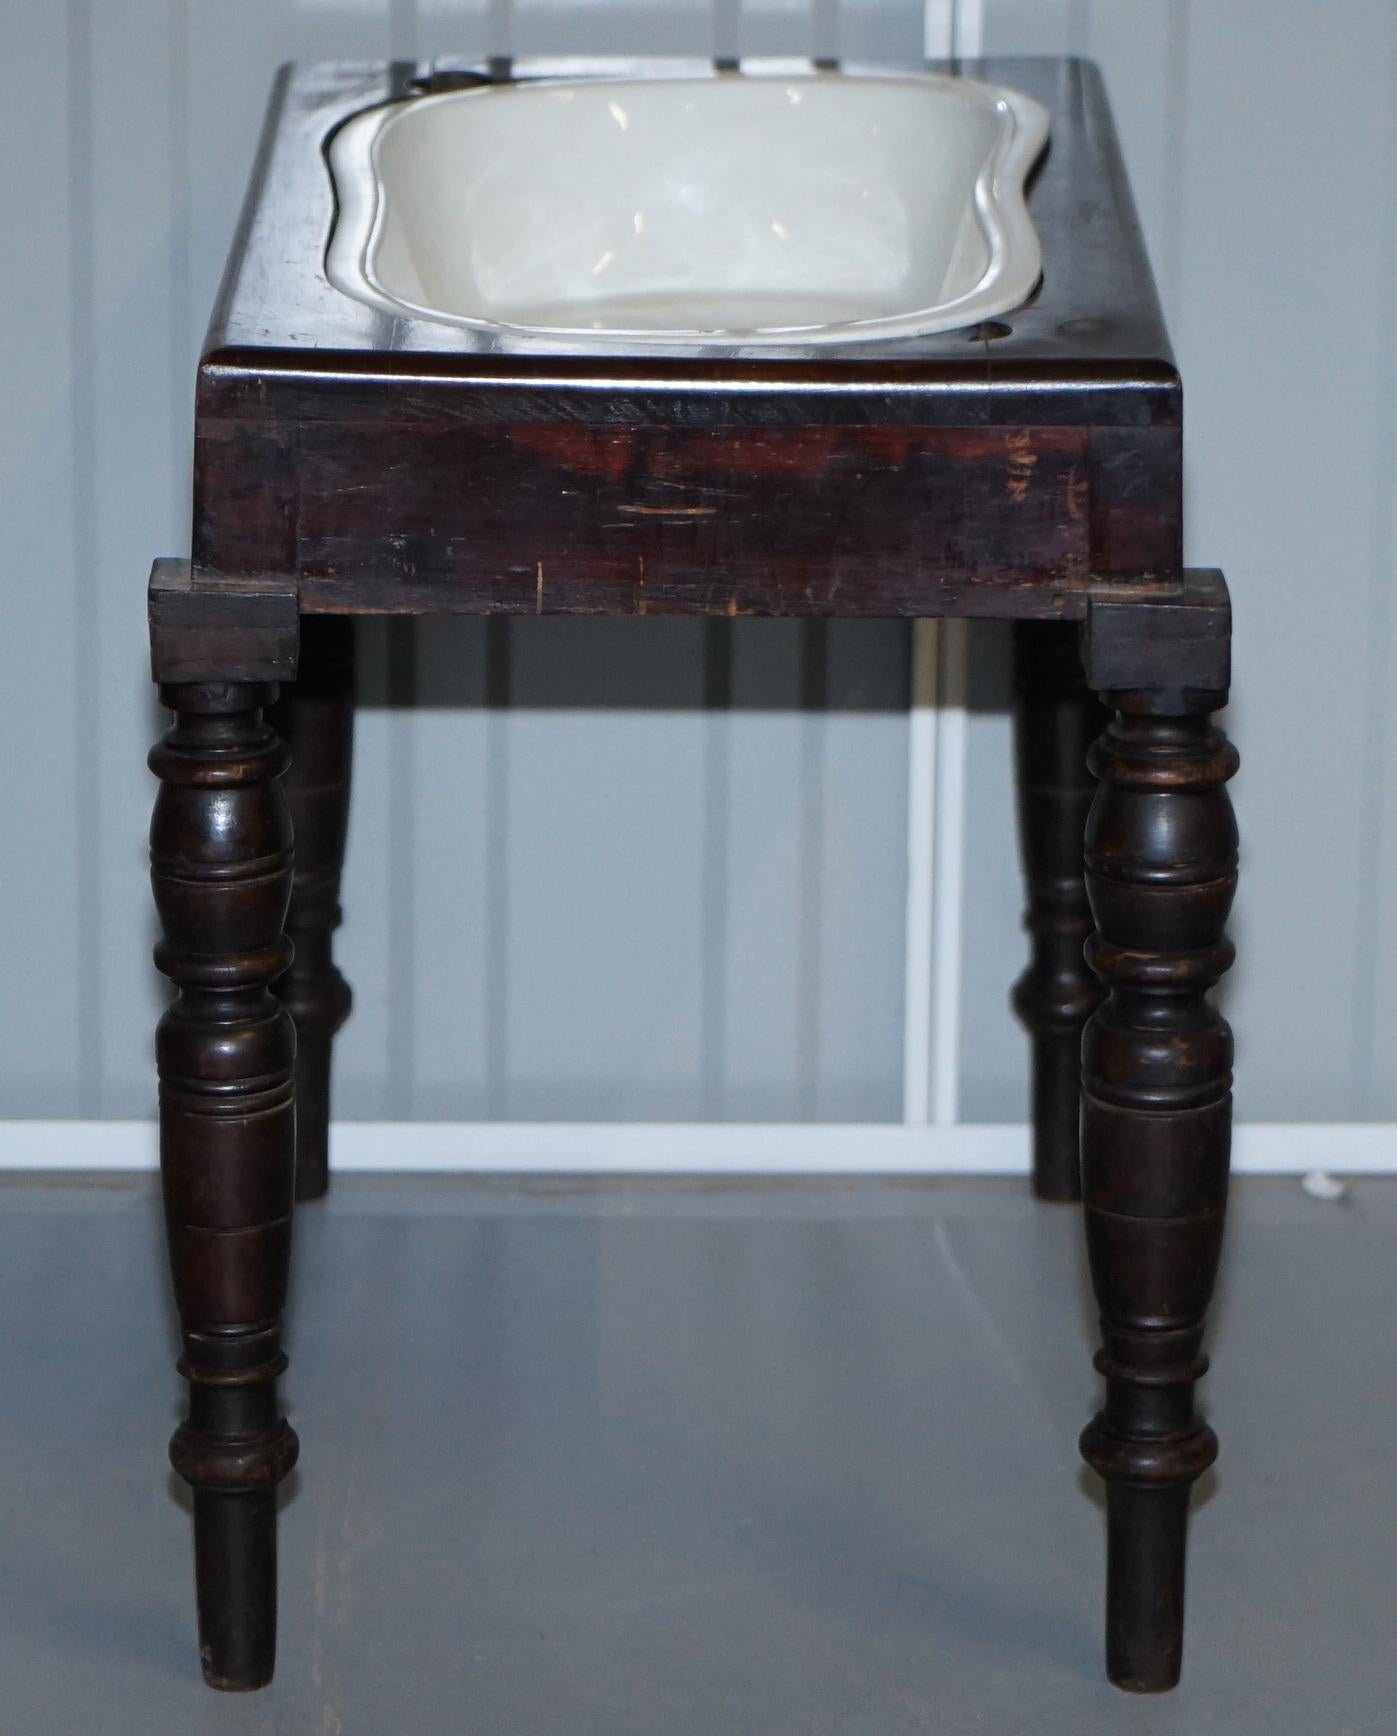 Victorian Side Table with Ceramic Stamped Porcelain Baby or Foot Bath Wash Basin 7